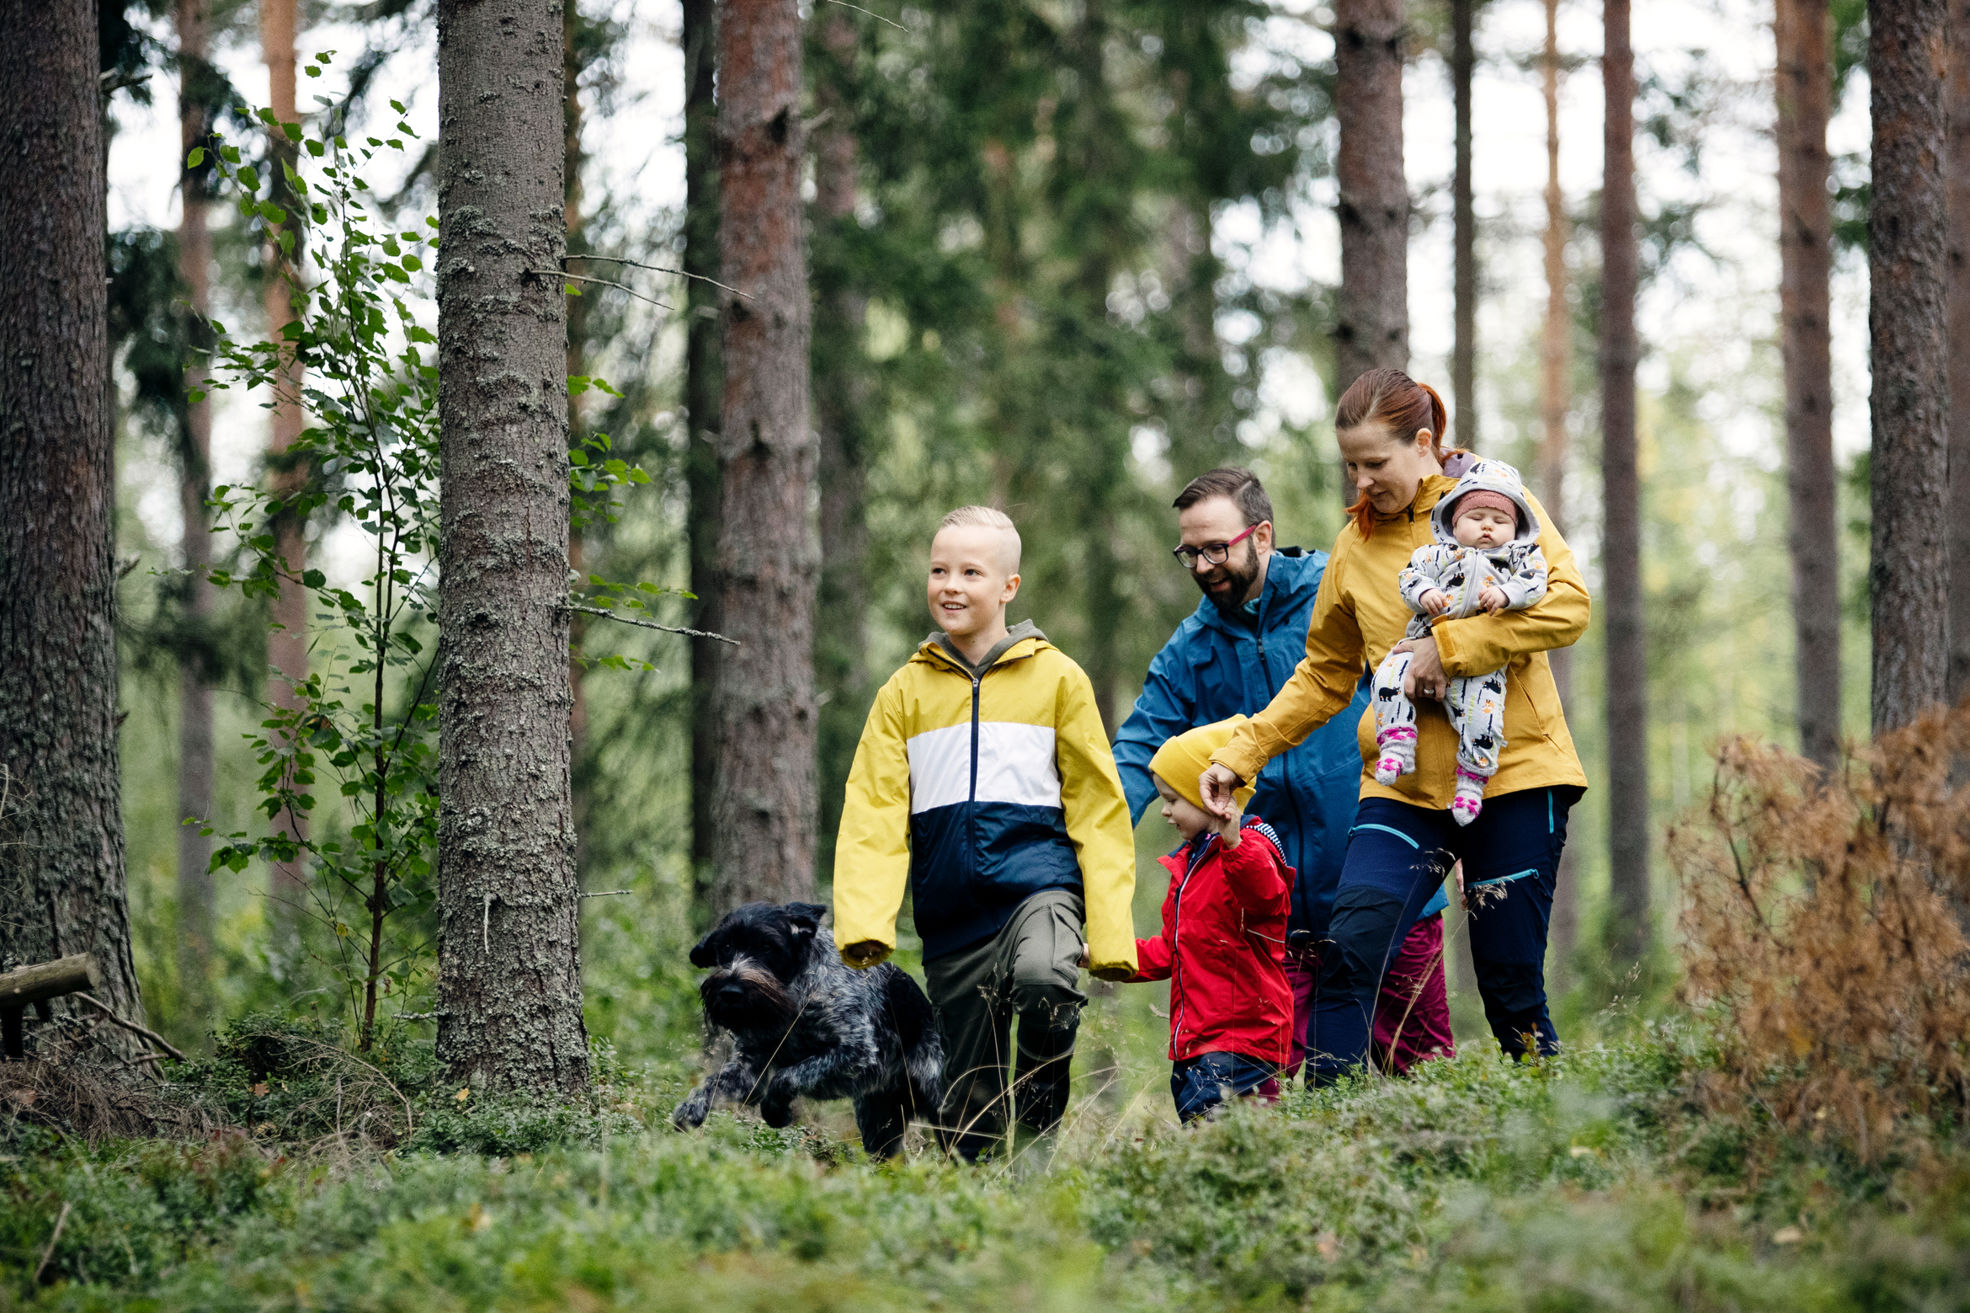 Forest owners help safeguard the biodiversity of Finnish forests in many different ways.